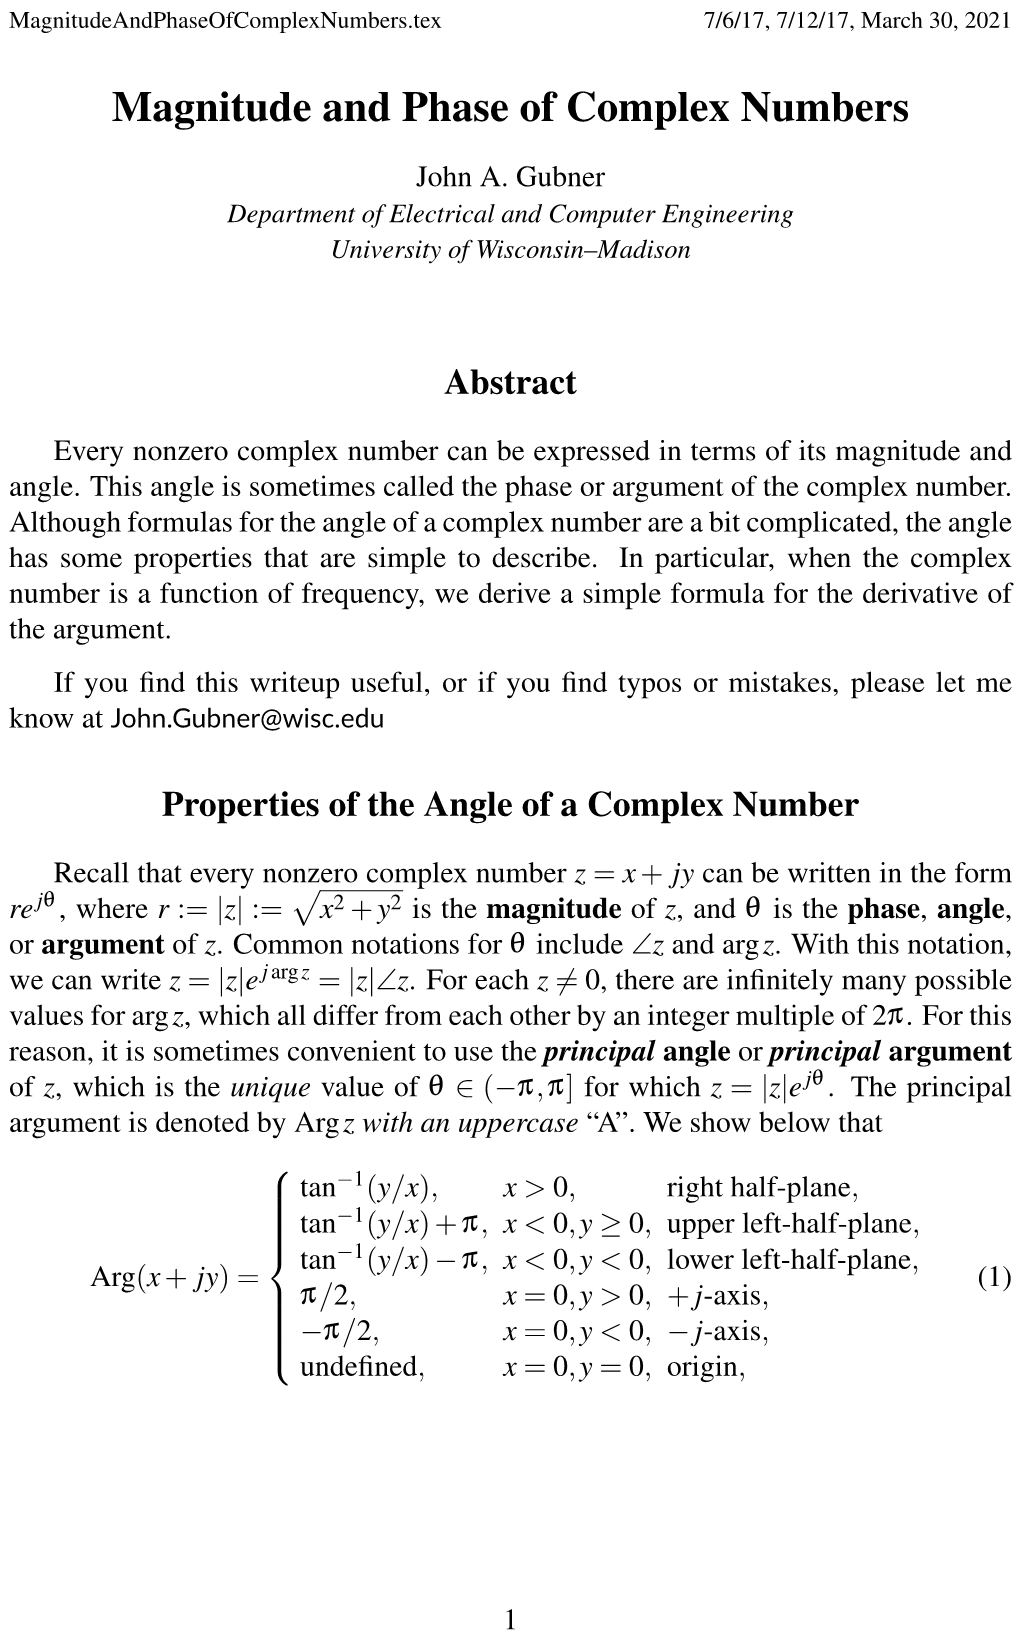 Magnitude and Phase of Complex Numbers